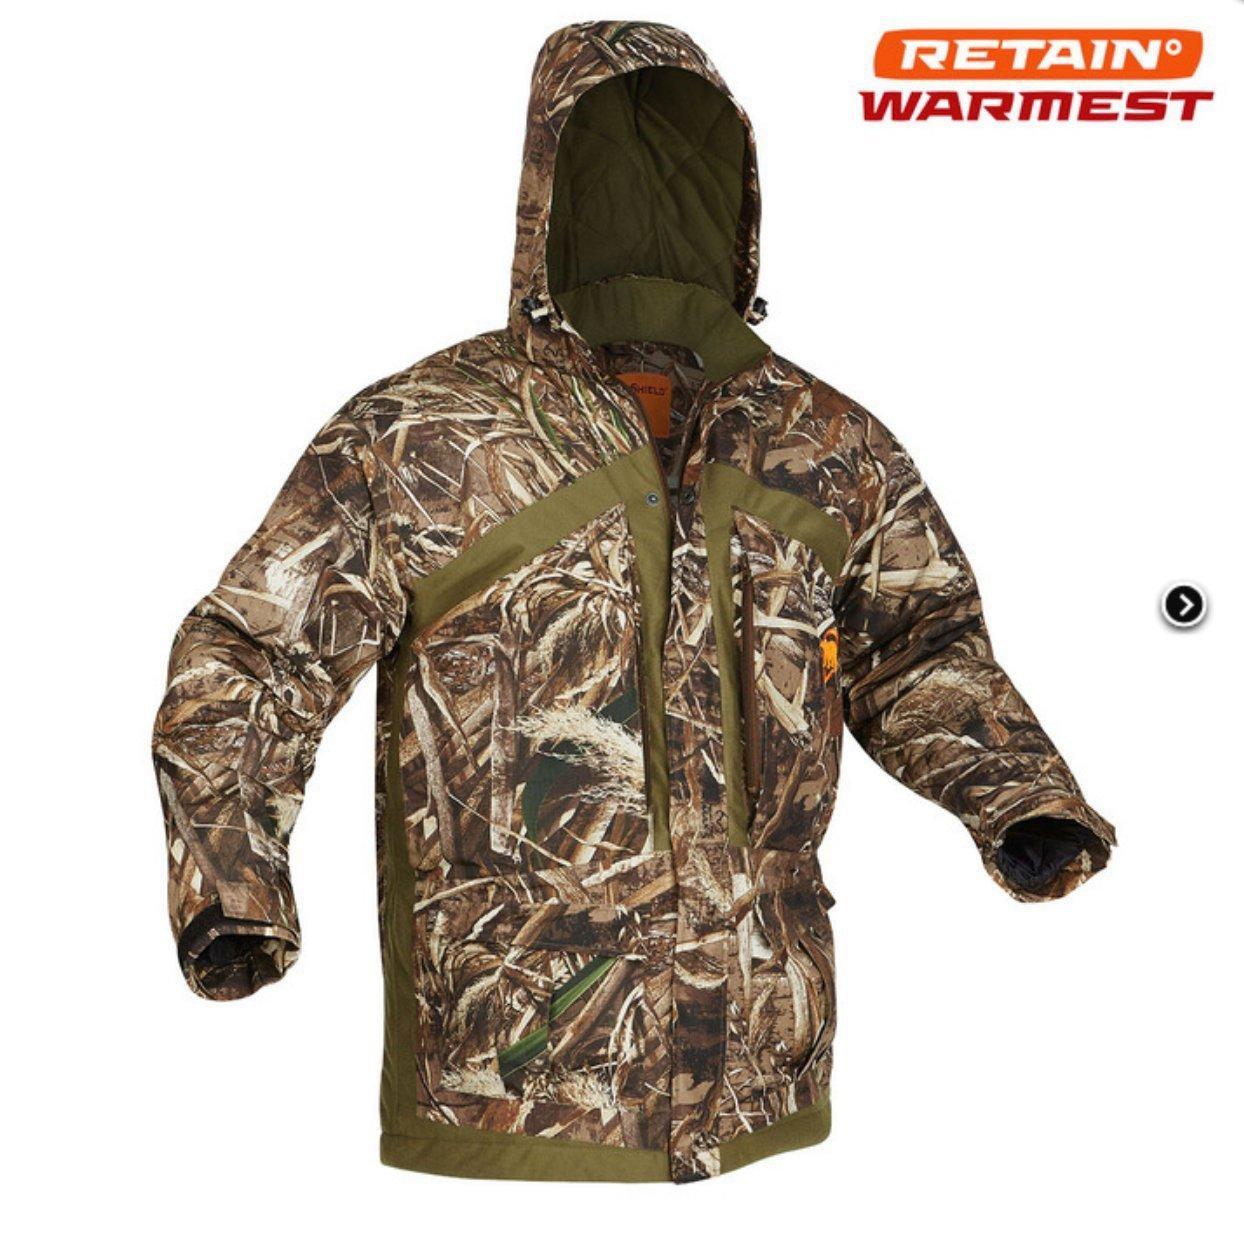 ArcticShield Classic Waterfowl Parka with Retain Technology